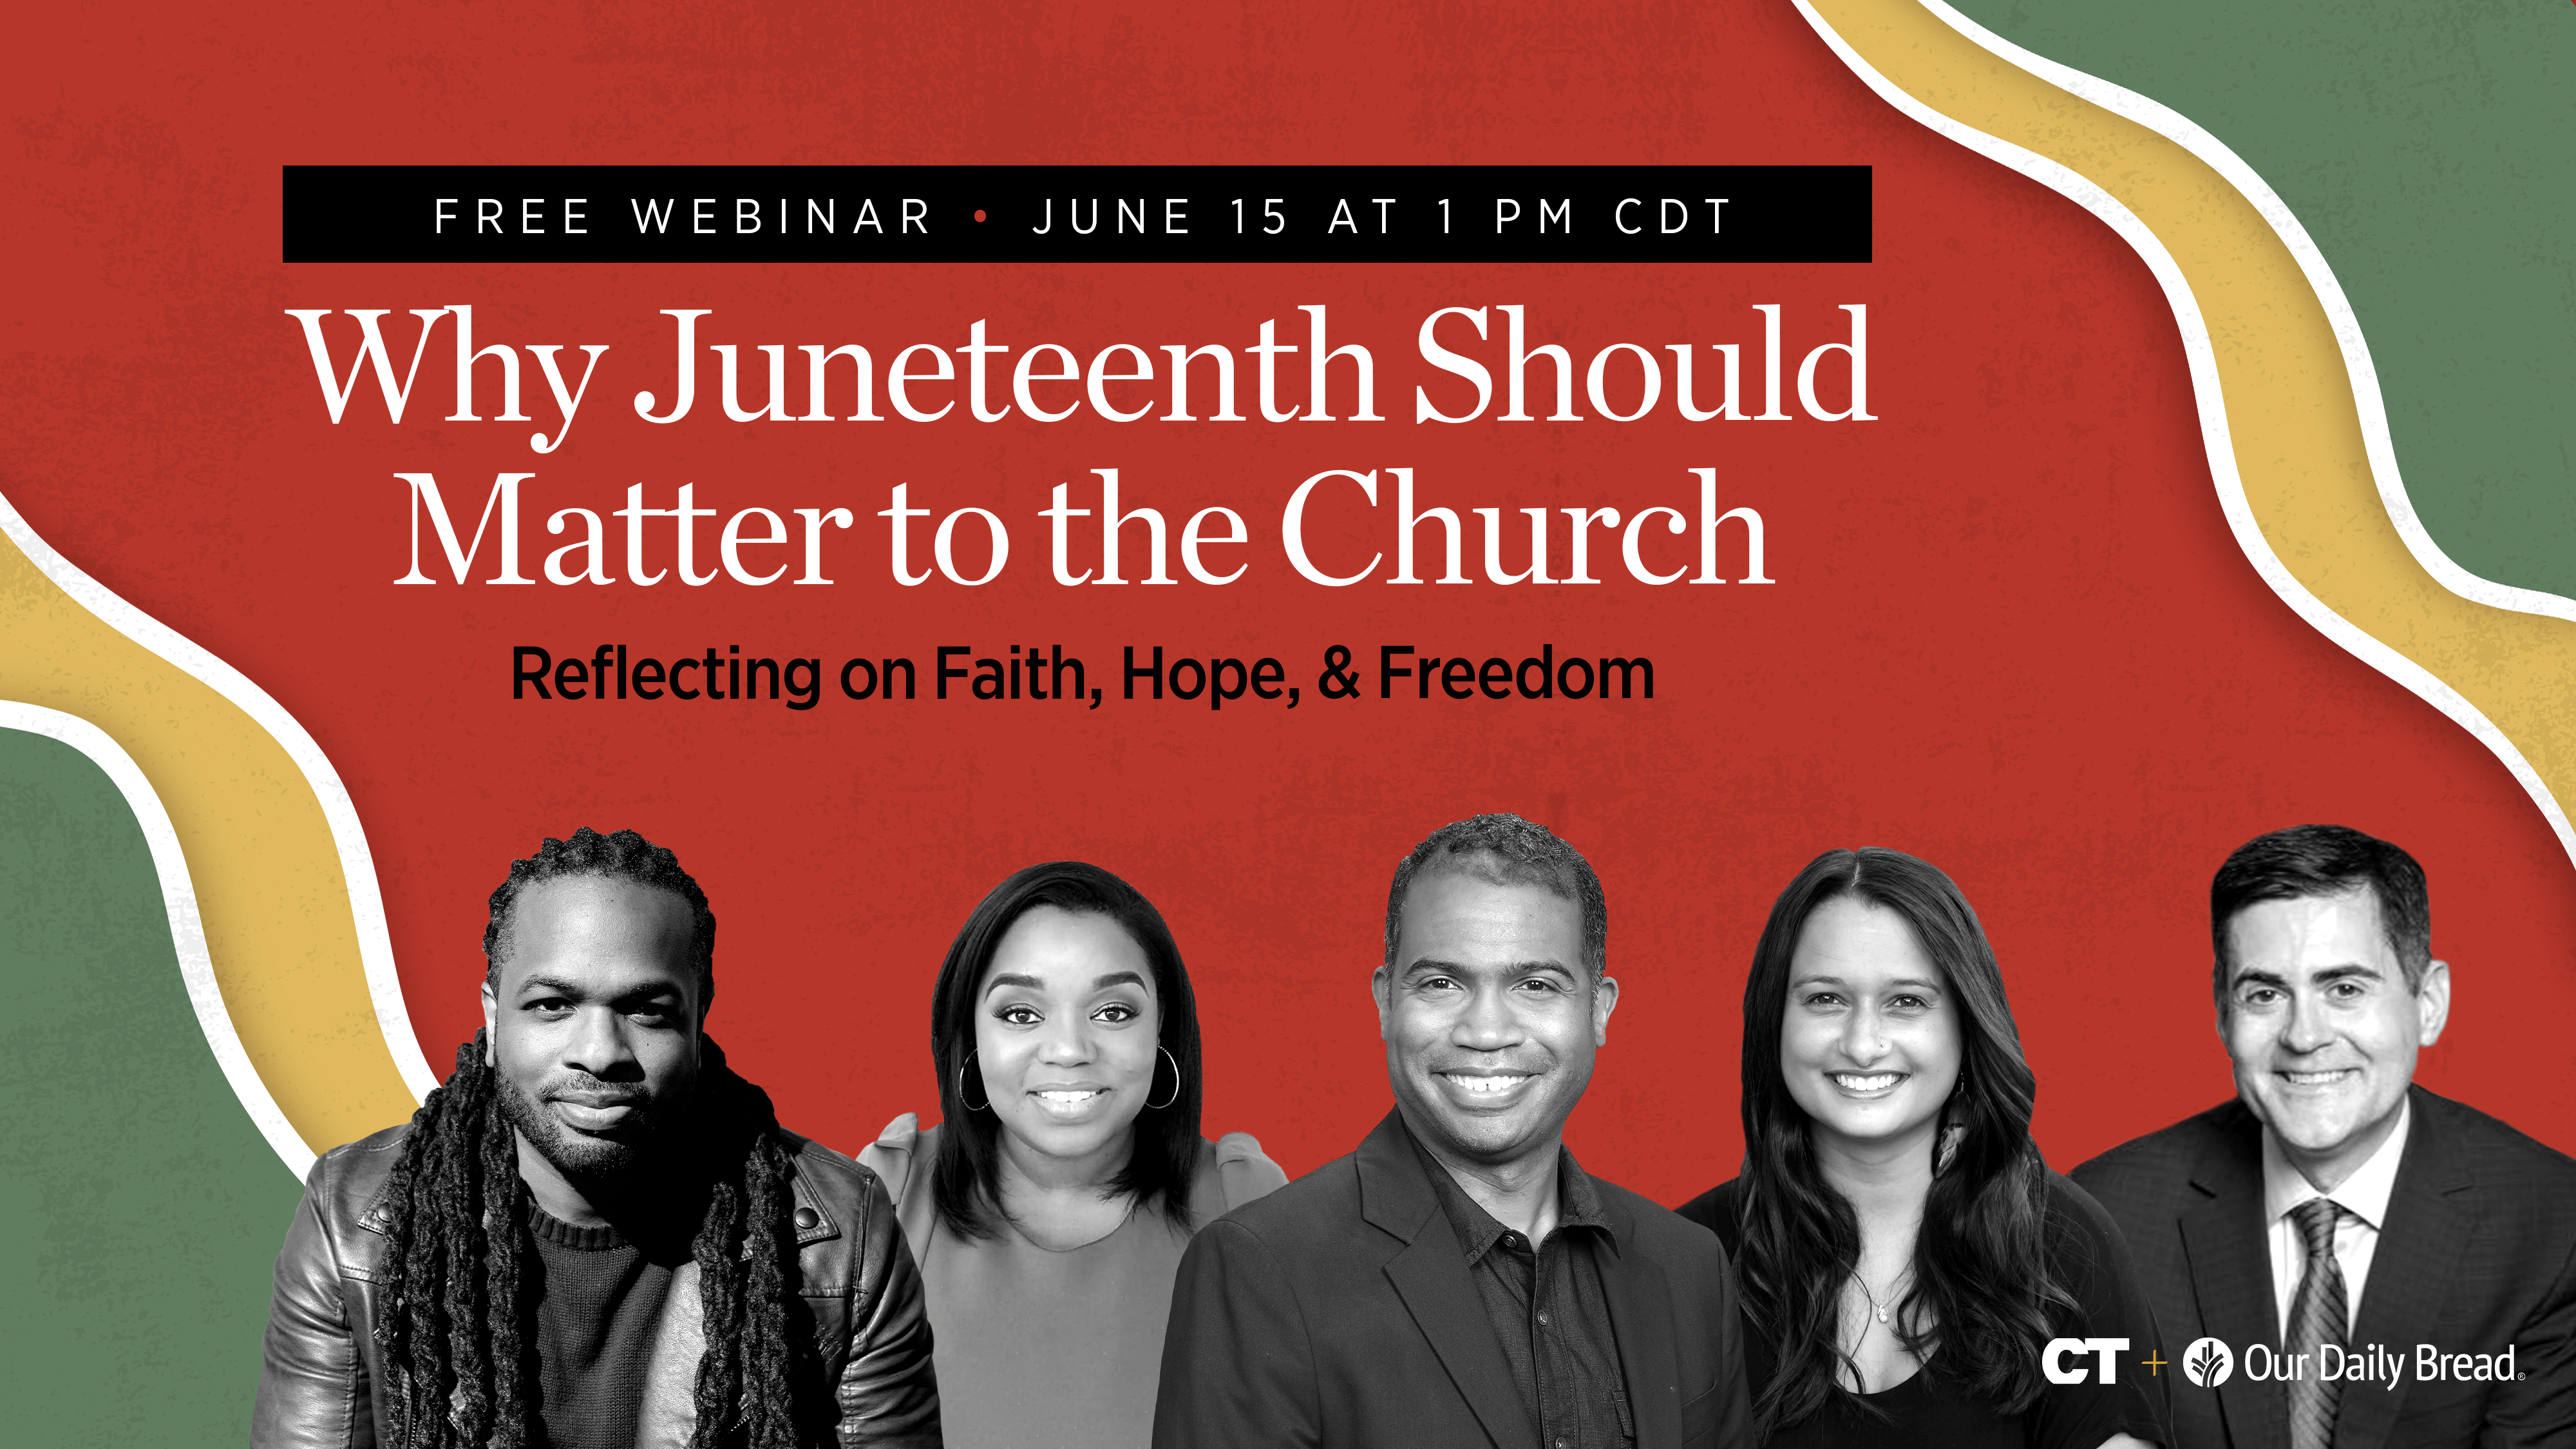 Why Juneteenth Should Matter to the Church